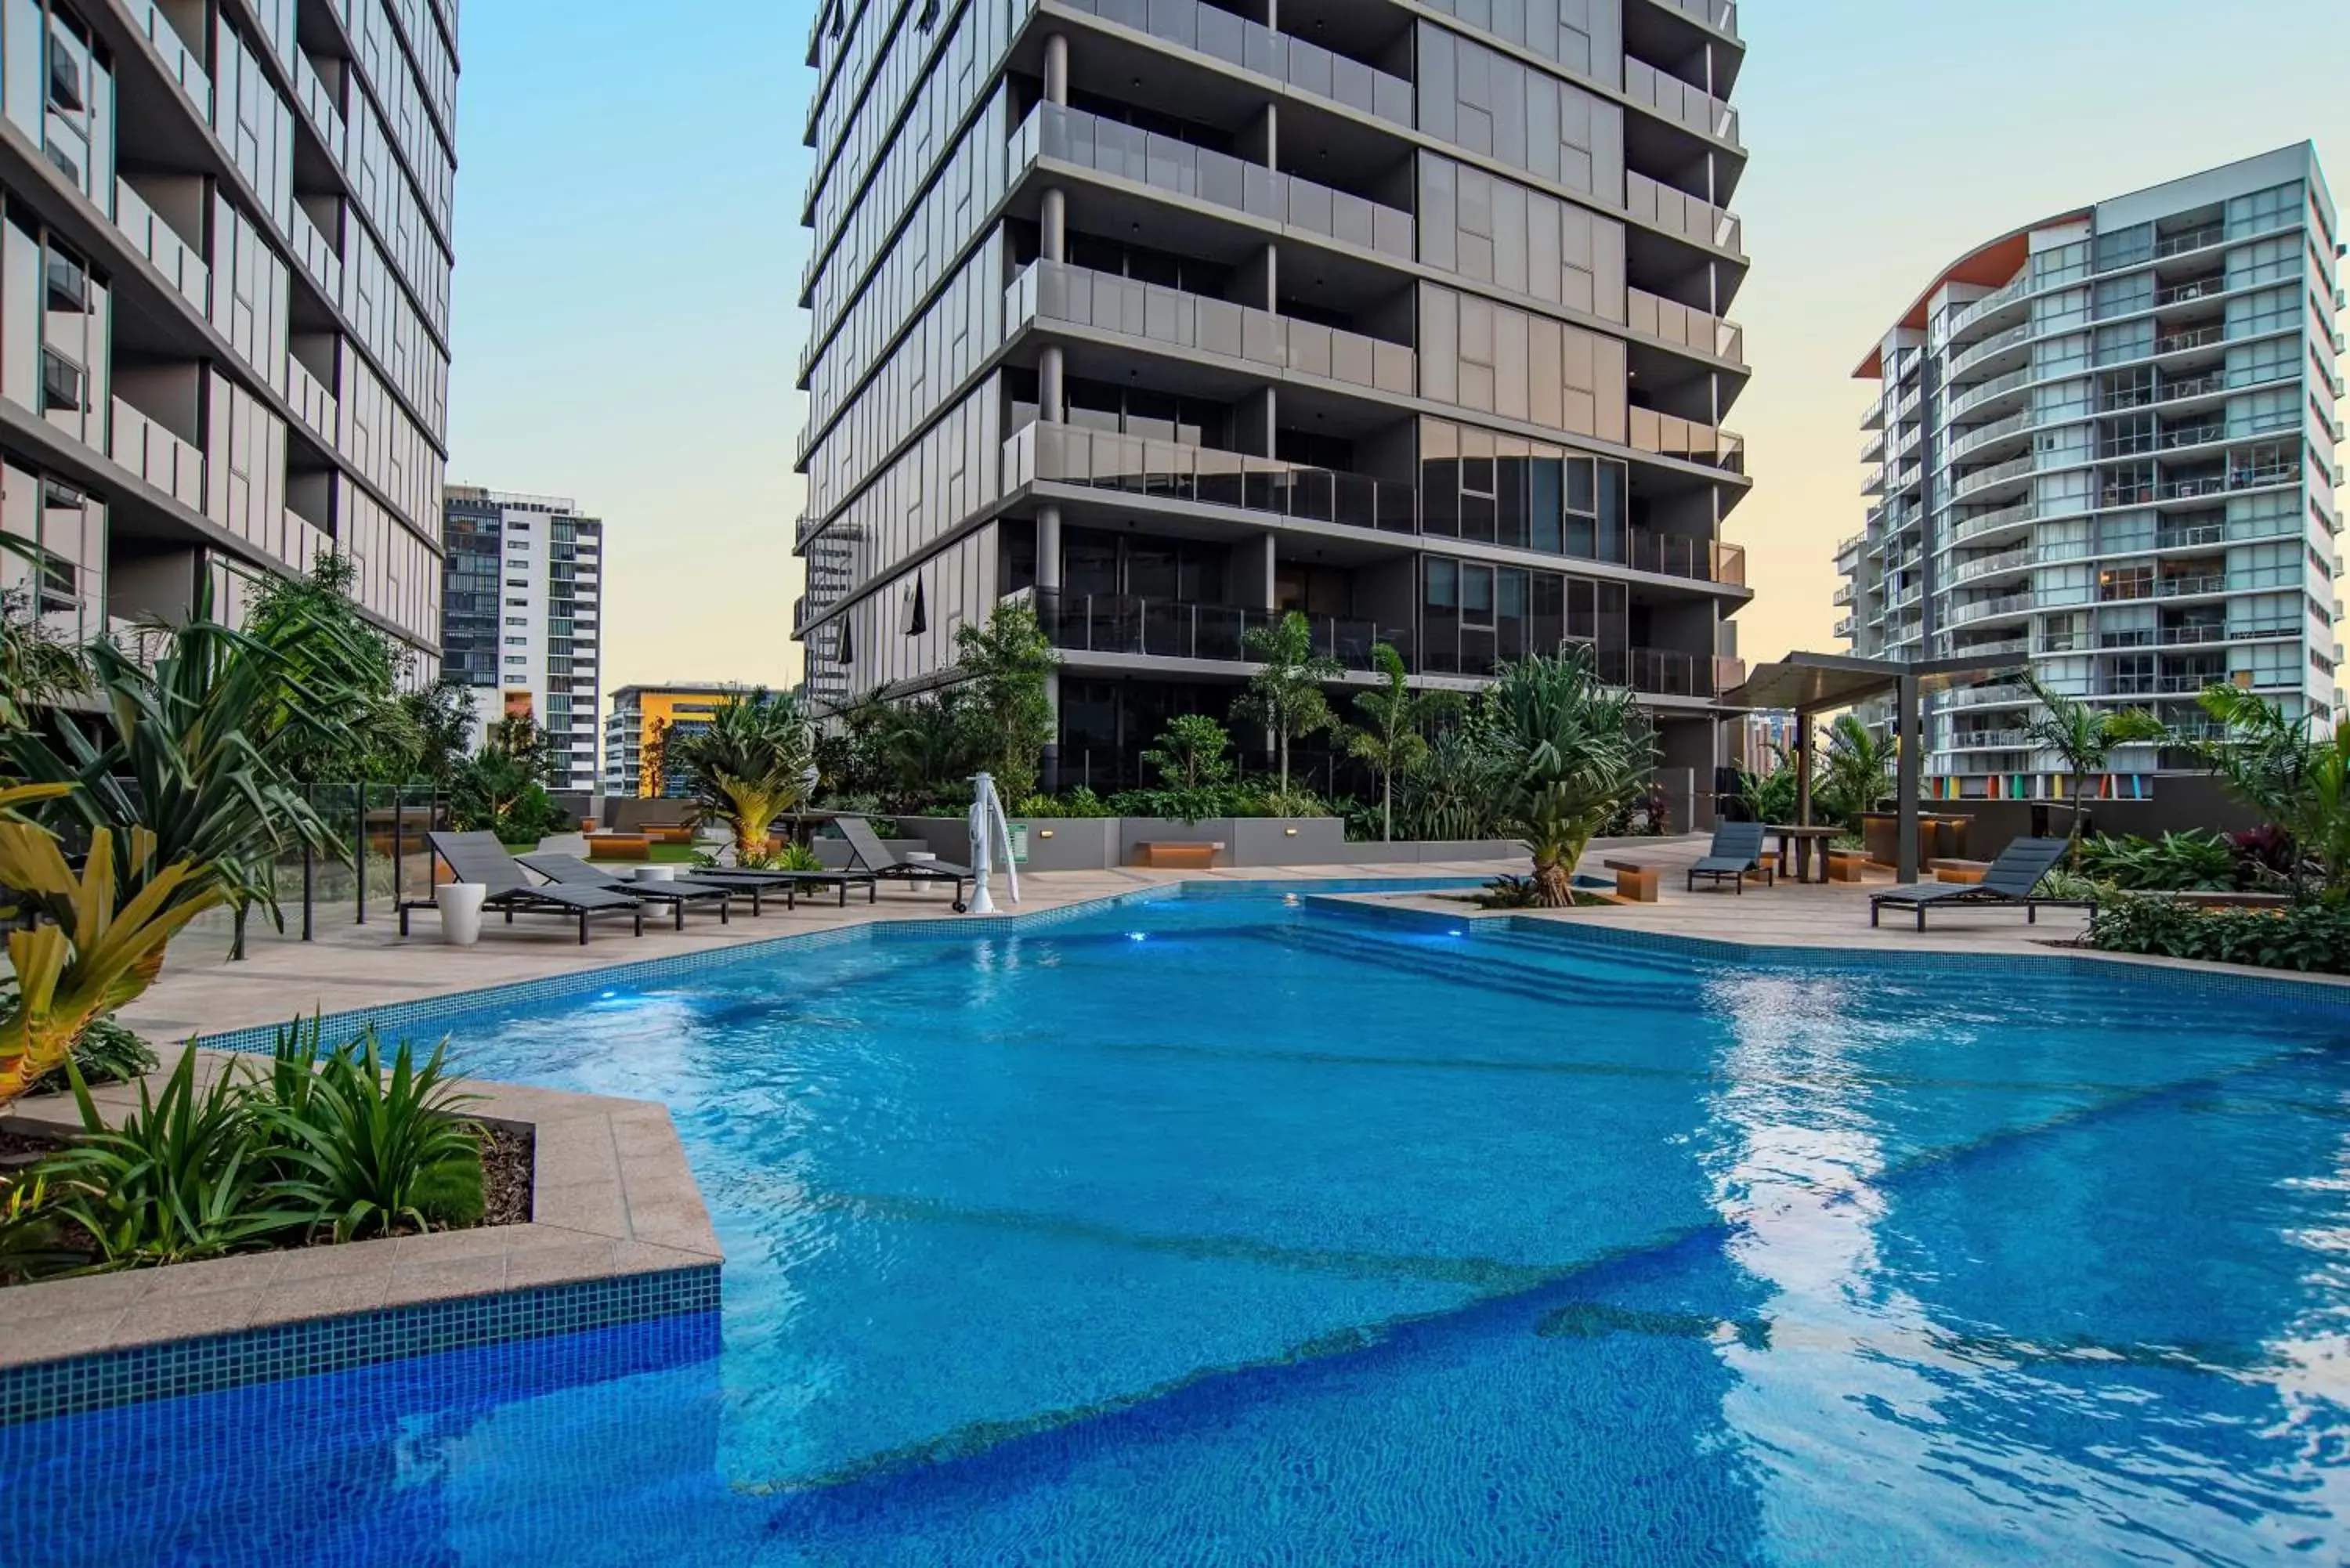 Property building, Swimming Pool in Brisbane One Apartments by CLLIX